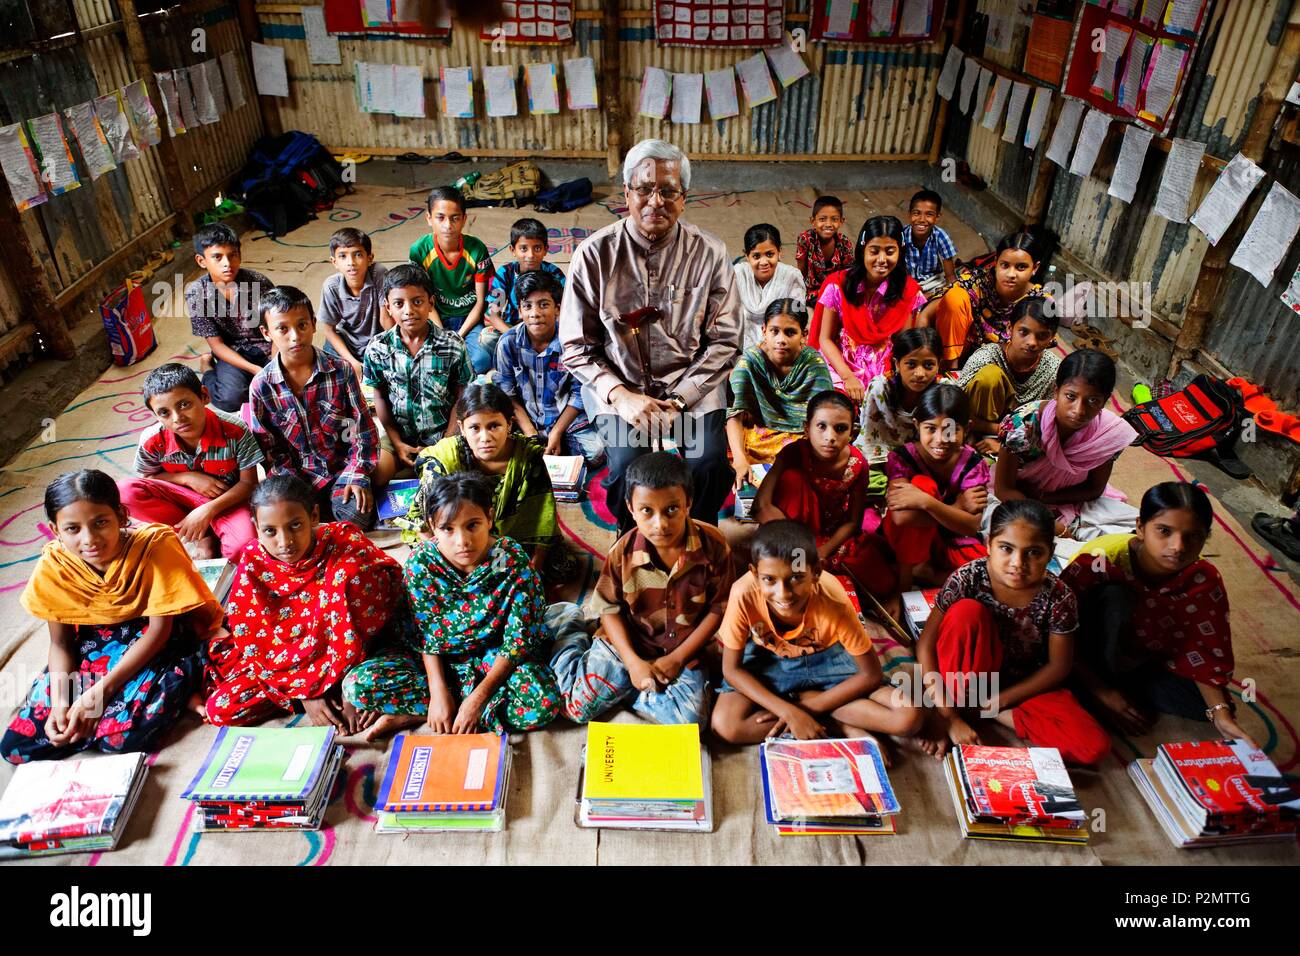 Bangladesh, Dhaka, posing among his students, Fazle Hasan Abed, the founder of the NGO BRAC which has over 100,000 employees, mostly women Stock Photo